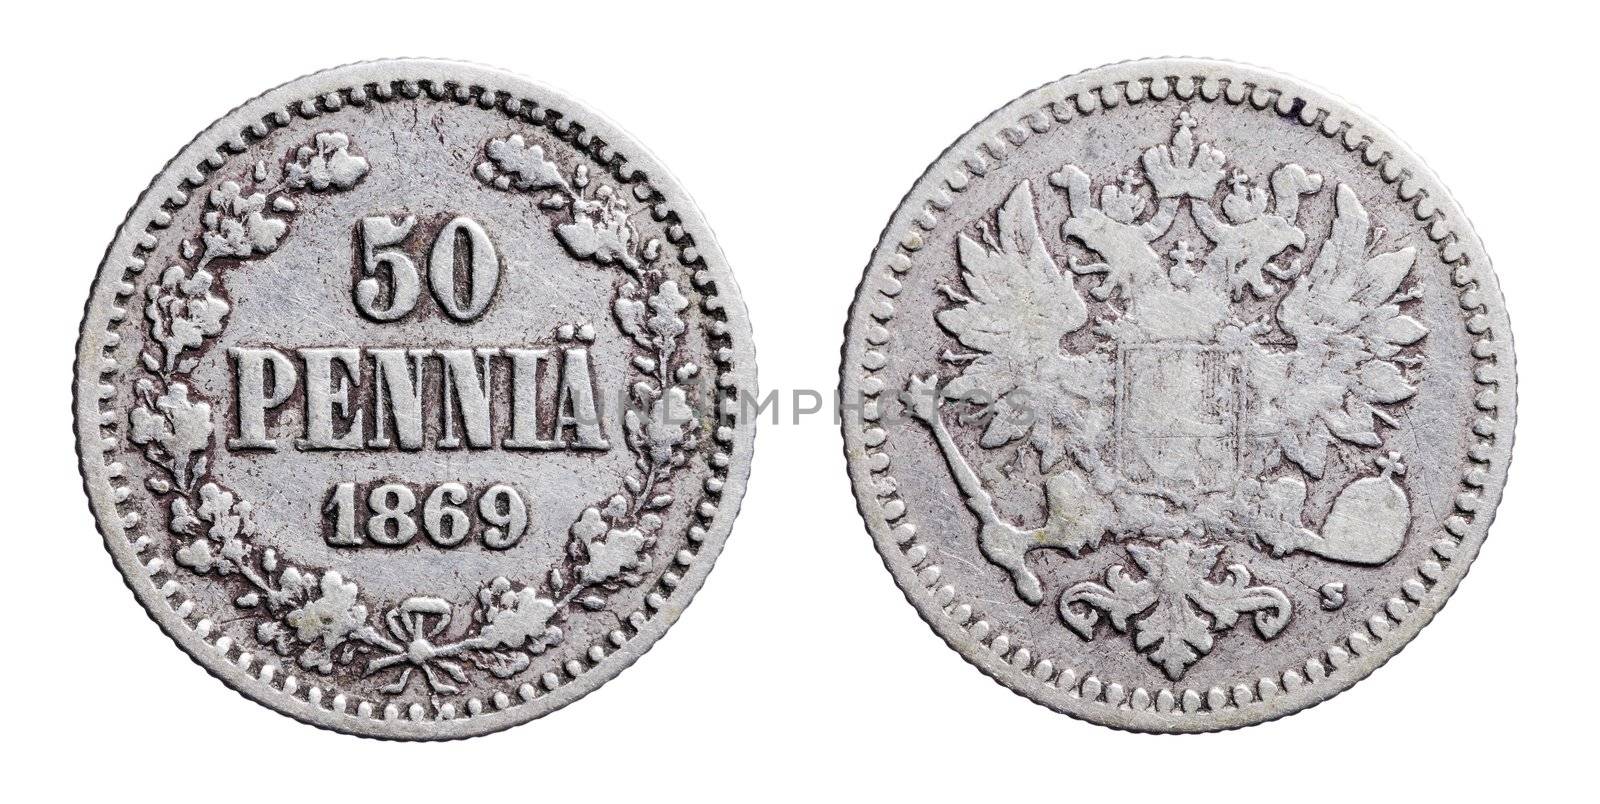 Old Finnish silver 50 penny (penni) coin from 1869.